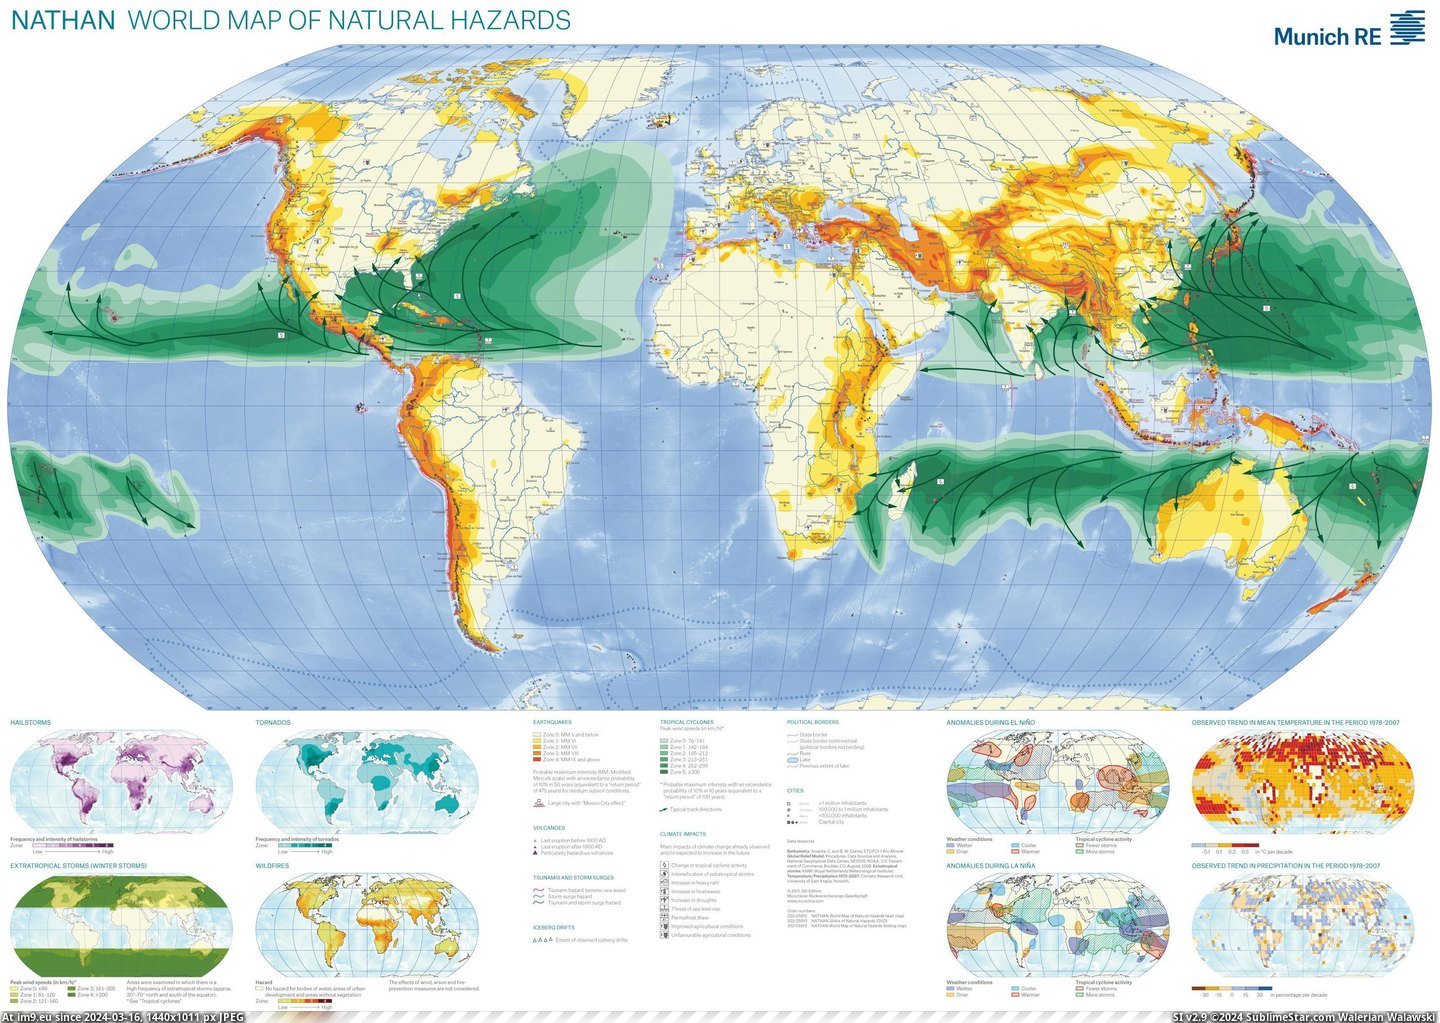 #World #Map #Natural #Cyclones #Tsunamis #Volcanoes #Earthquakes #Hazards [Dataisbeautiful] World Map of Natural Hazards (earthquakes, cyclones, volcanoes, tsunamis and more ... ) [X-Post MapPorn] Pic. (Obraz z album My r/DATAISBEAUTIFUL favs))